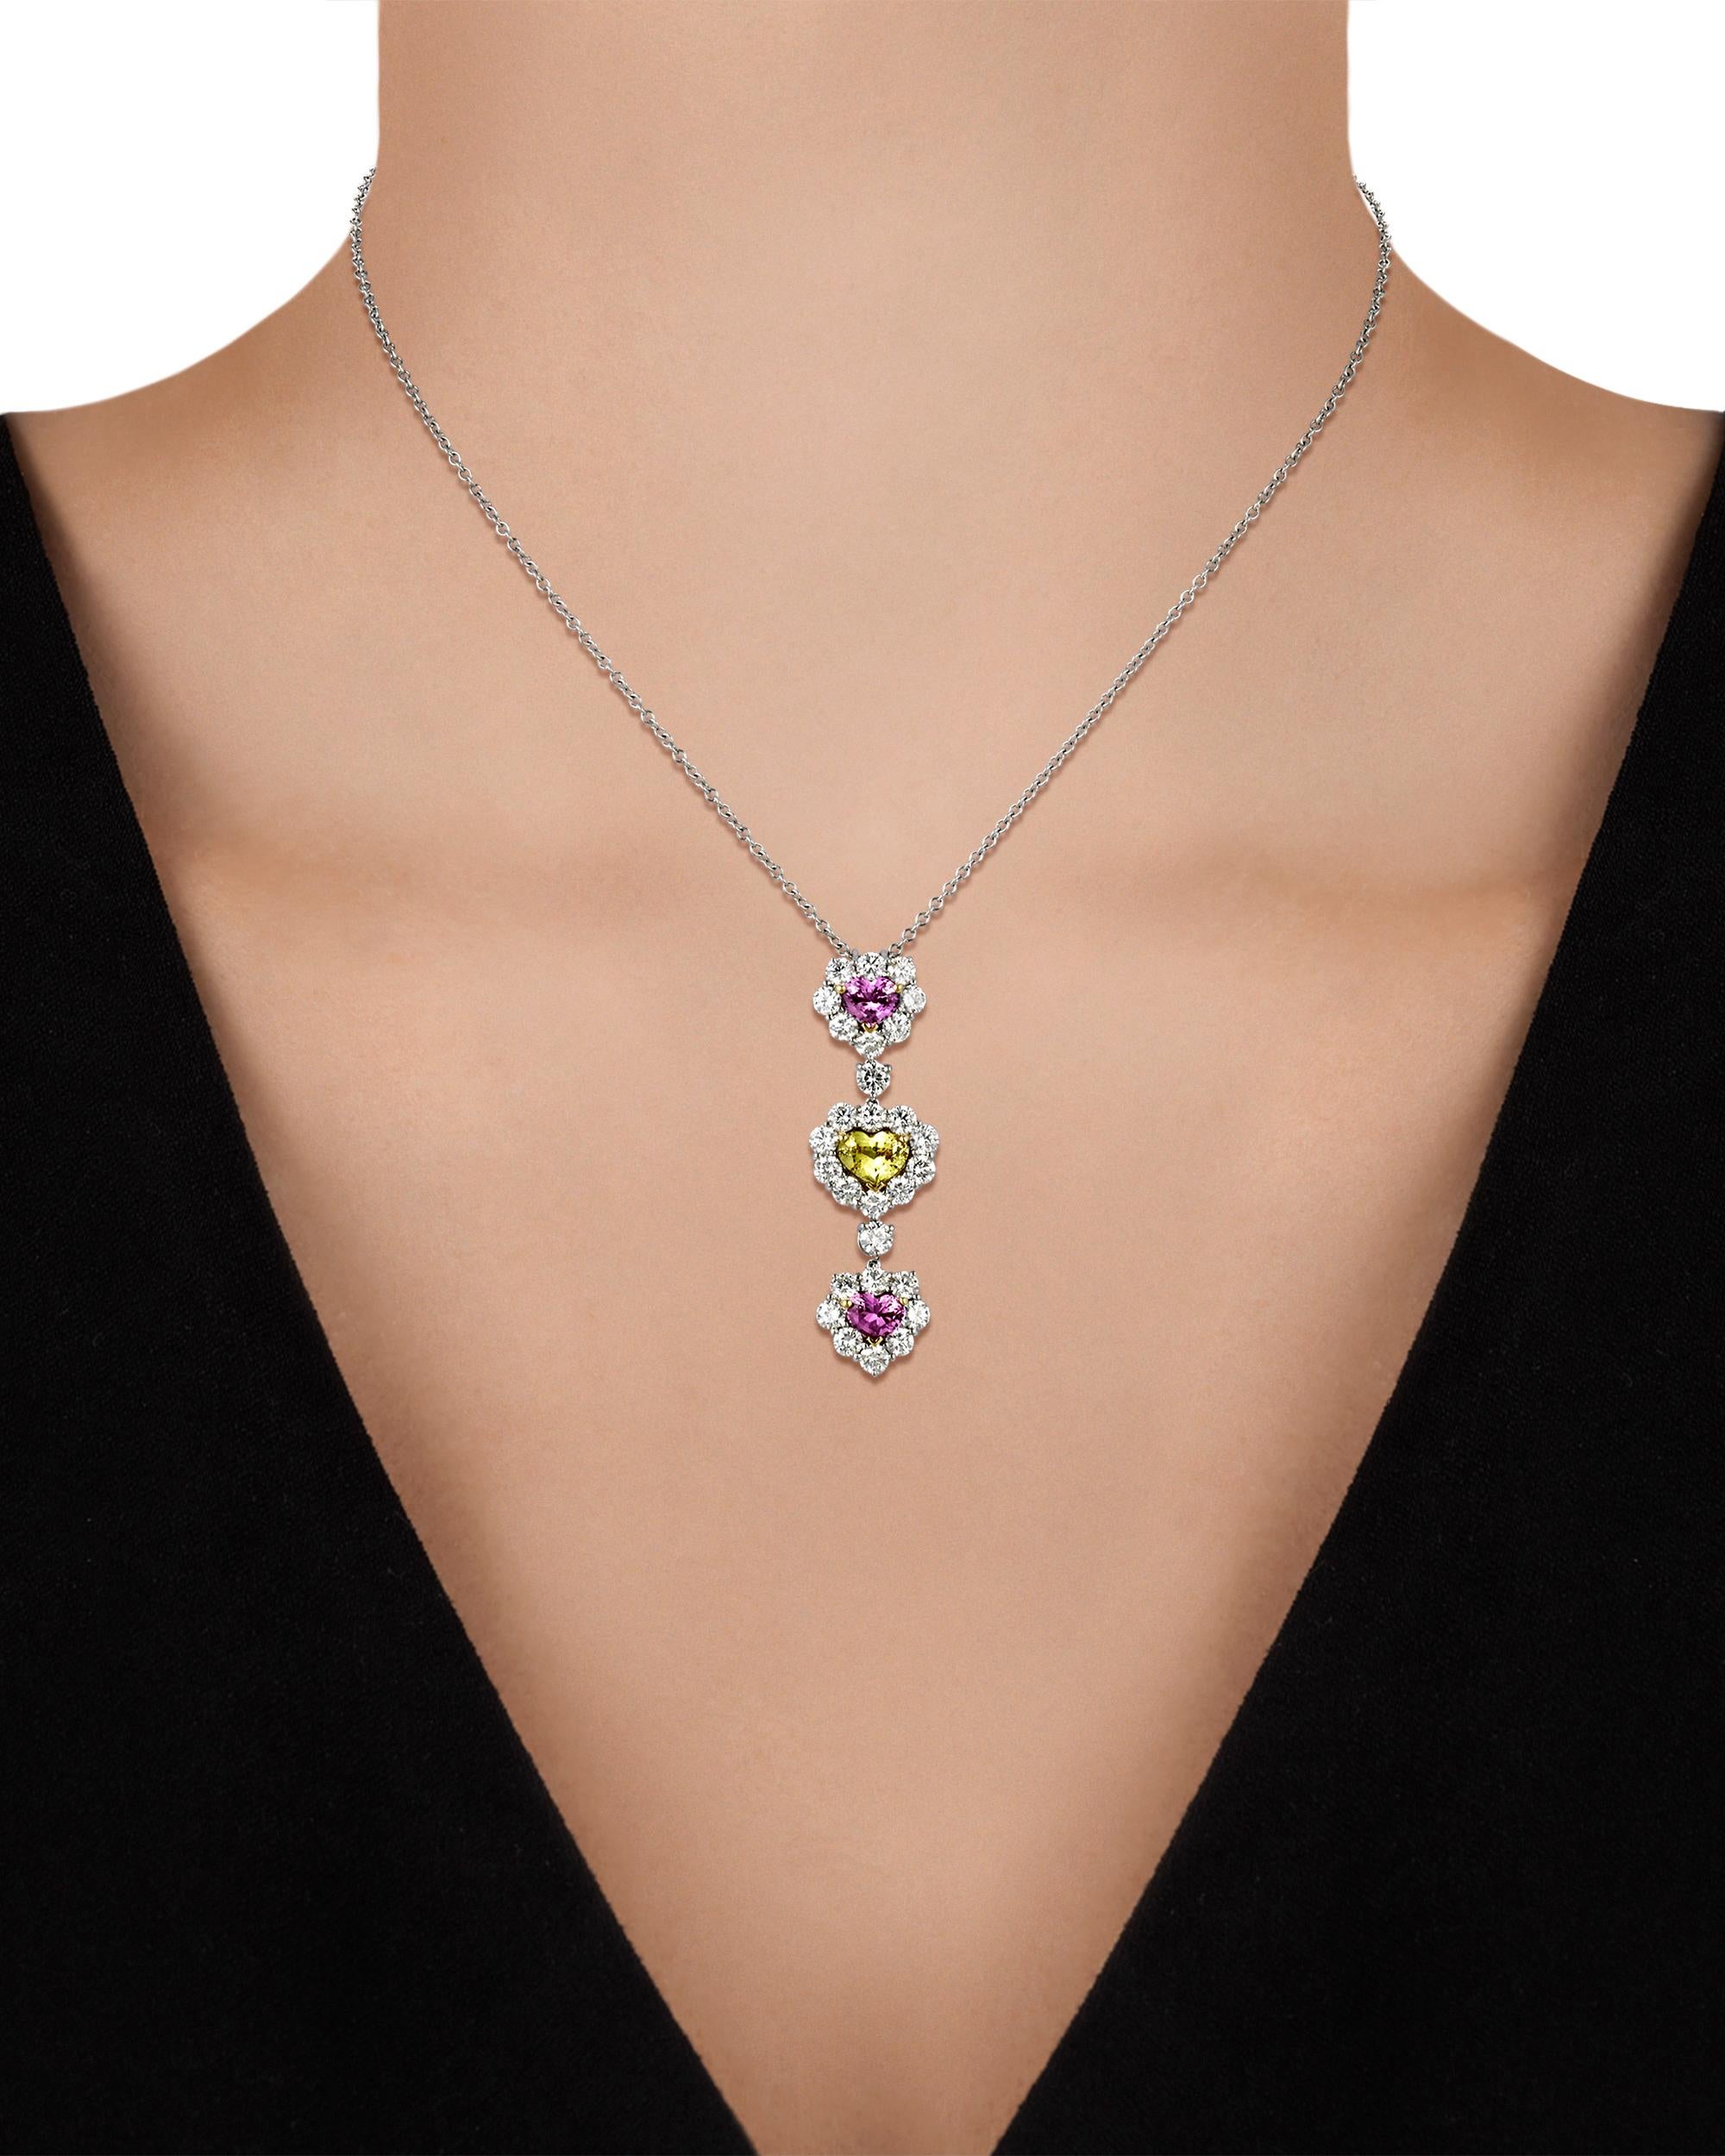 Three heart-shaped fancy colored sapphires weighing a combined 3.20 carats are beautifully set in this charming pendant necklace. Displaying pink and yellow hues, the mixed-cut gemstones have been certified by C. Dunaigre of Switzerland to be